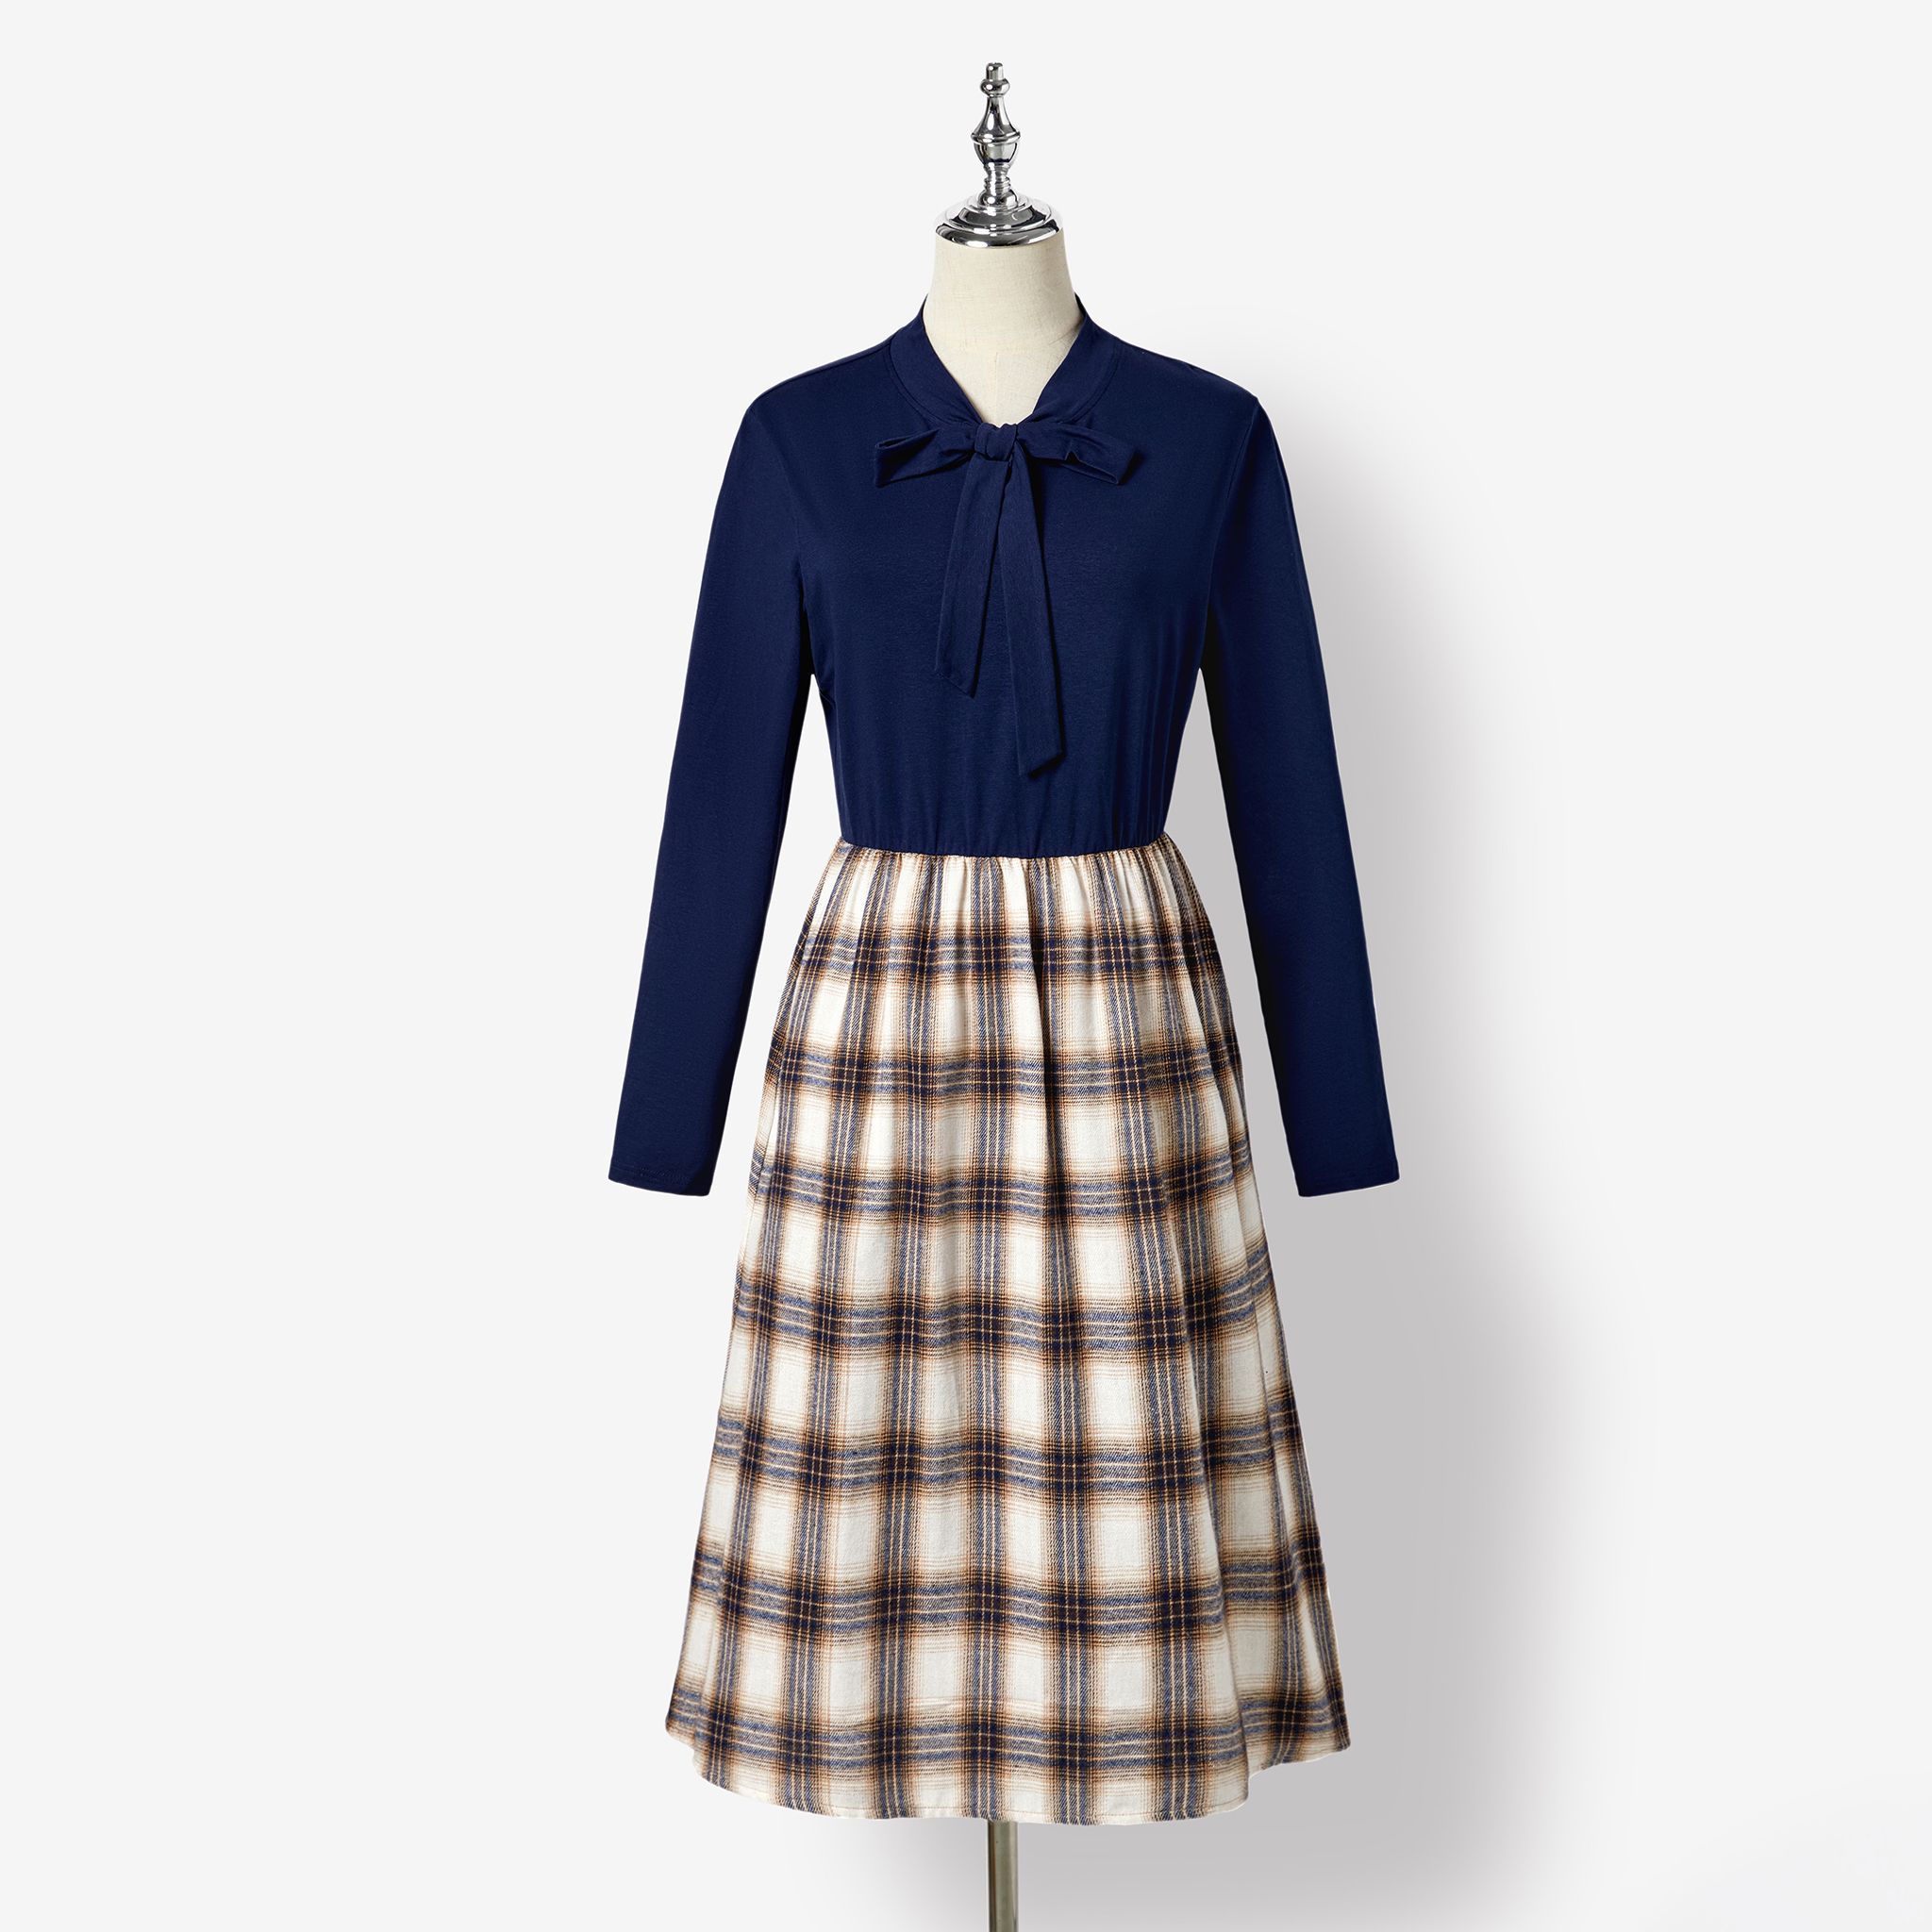 Family Matching Casual Long-sleeve Plaid Fabric Splicing Dresses And Shirts Sets